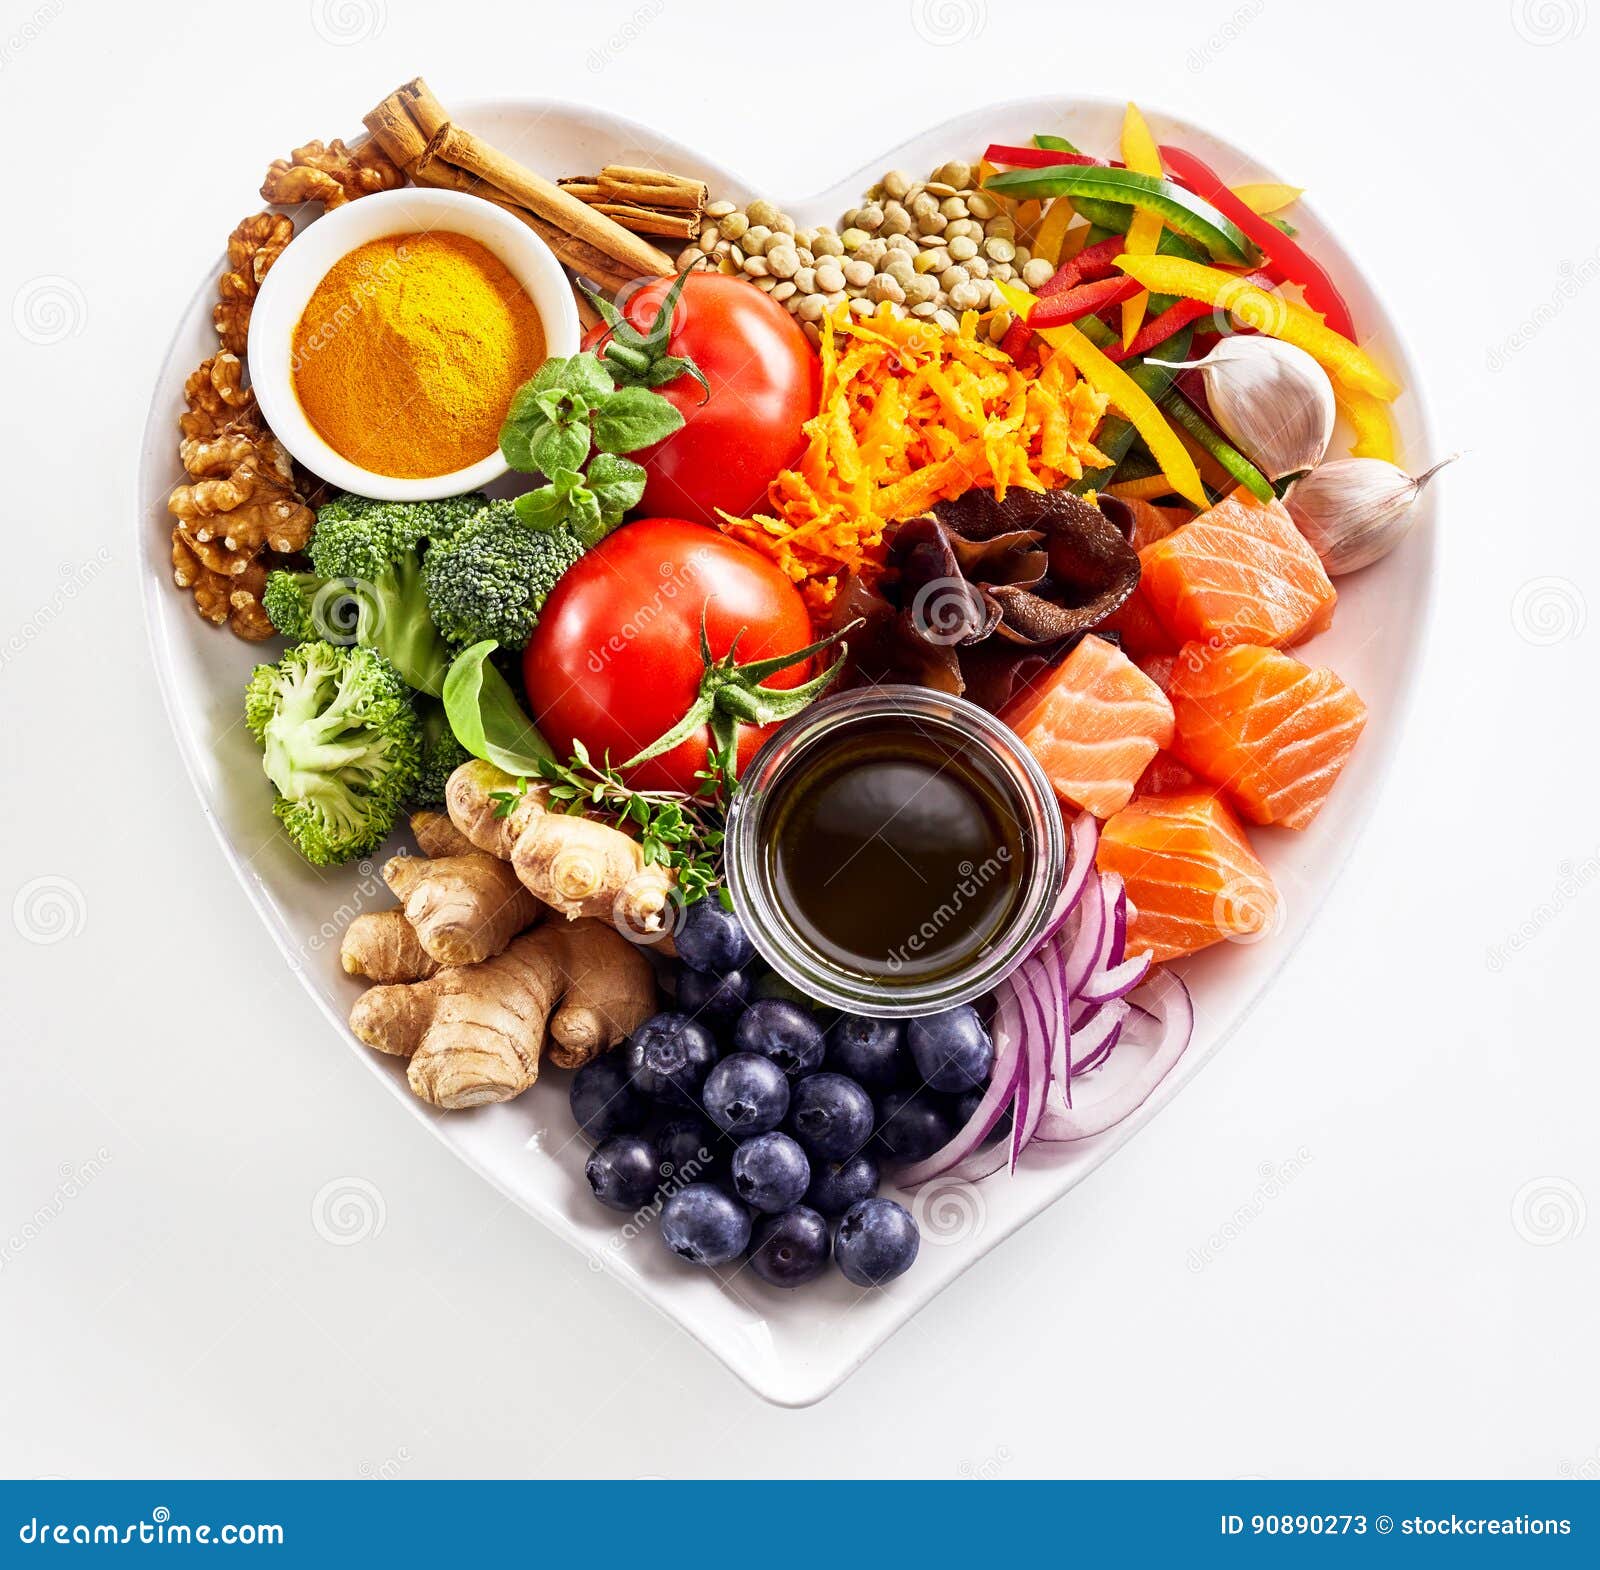 heart-d plate of healthy heart foods